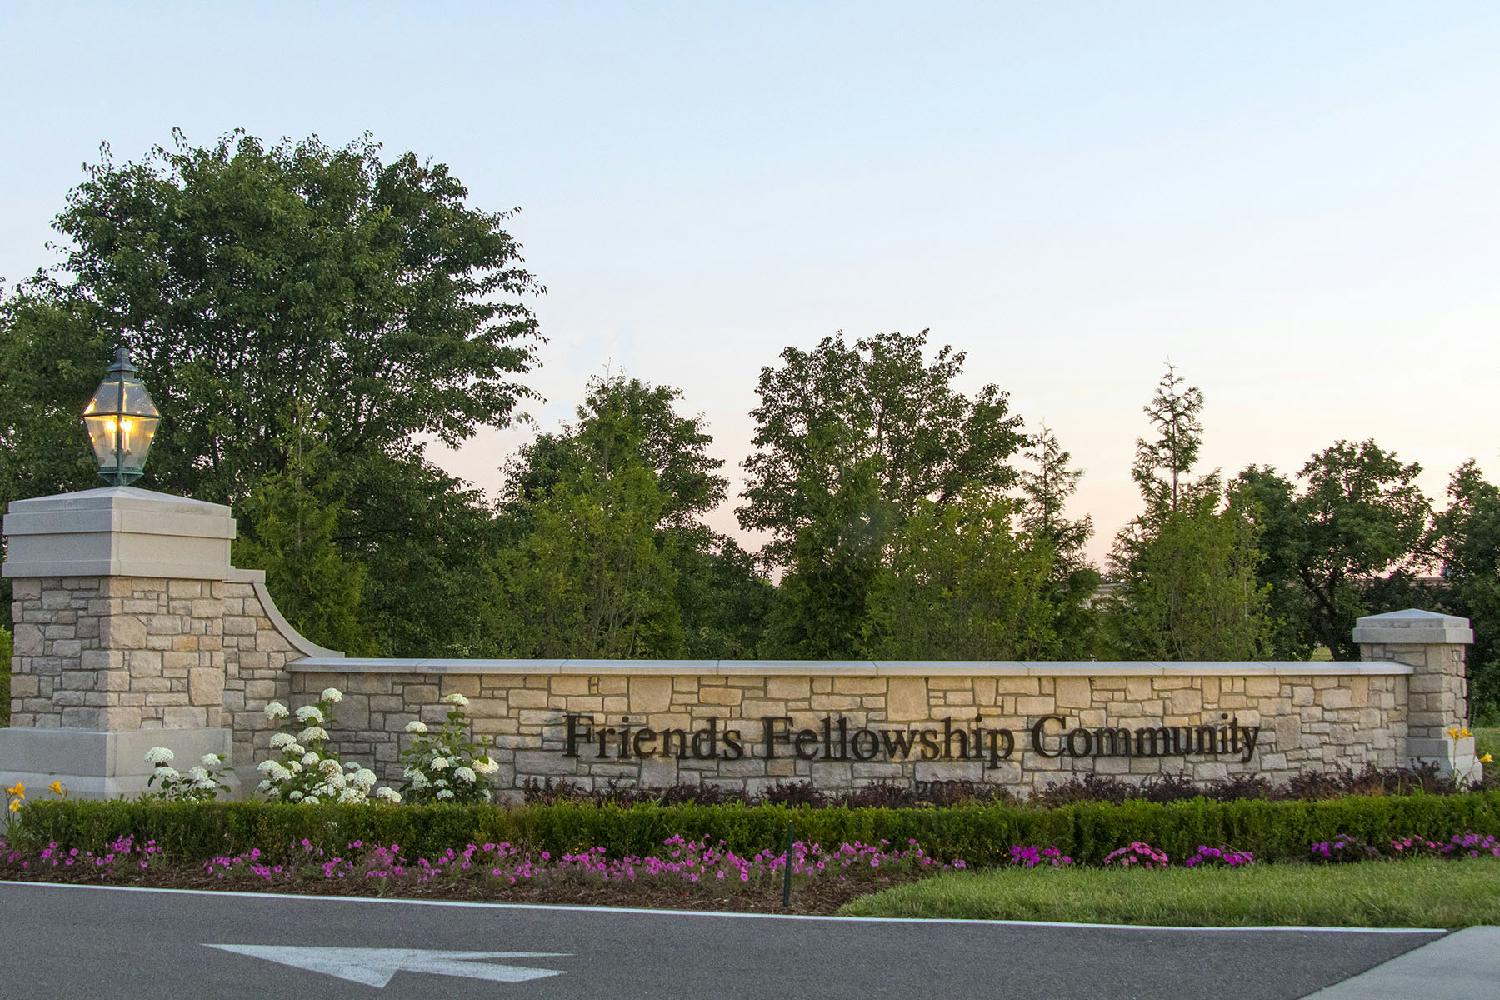 Employees, residents and visitors are greeted with an attractive stone wall at the entrance to the community.